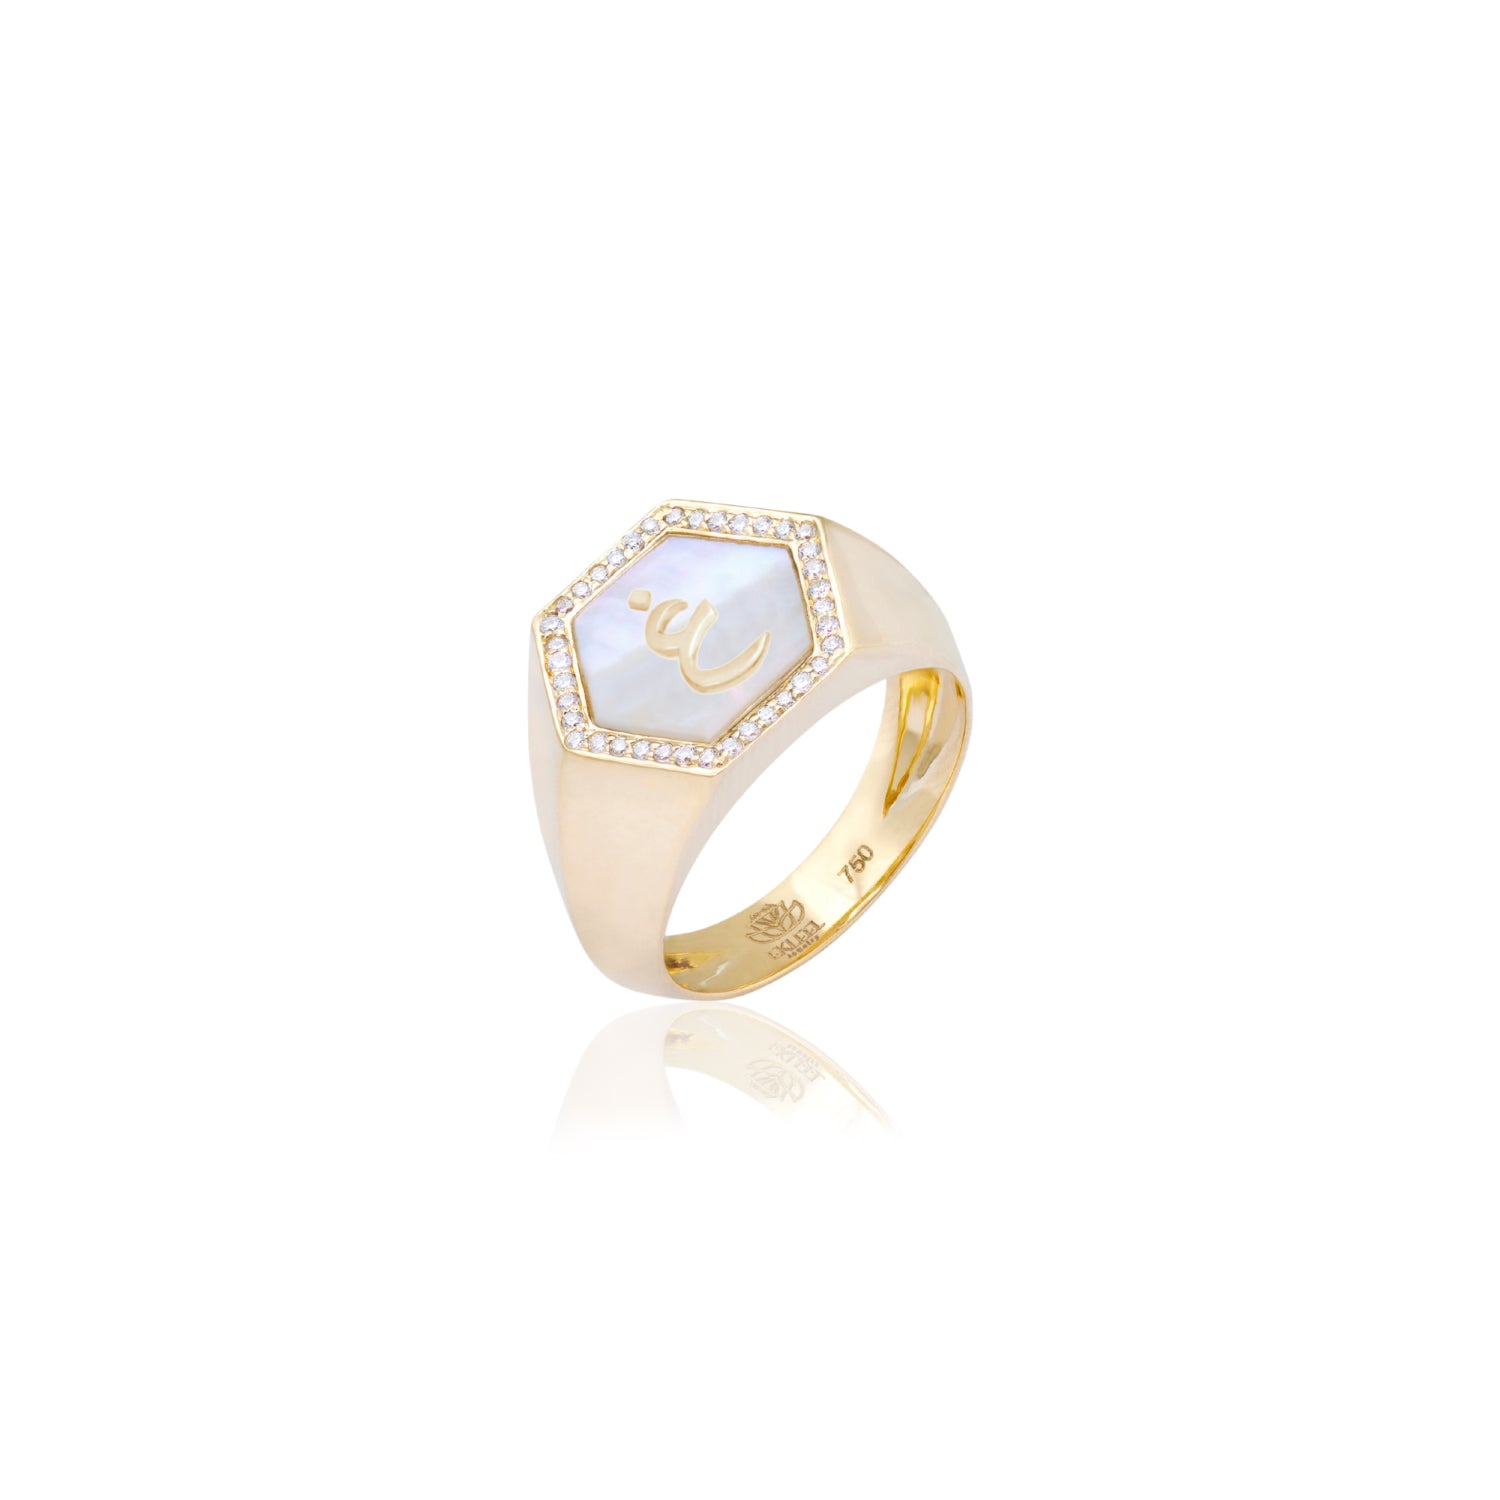 Qamoos 2.0 Letter غ White Mother of Pearl and Diamond Signet Ring in Yellow Gold